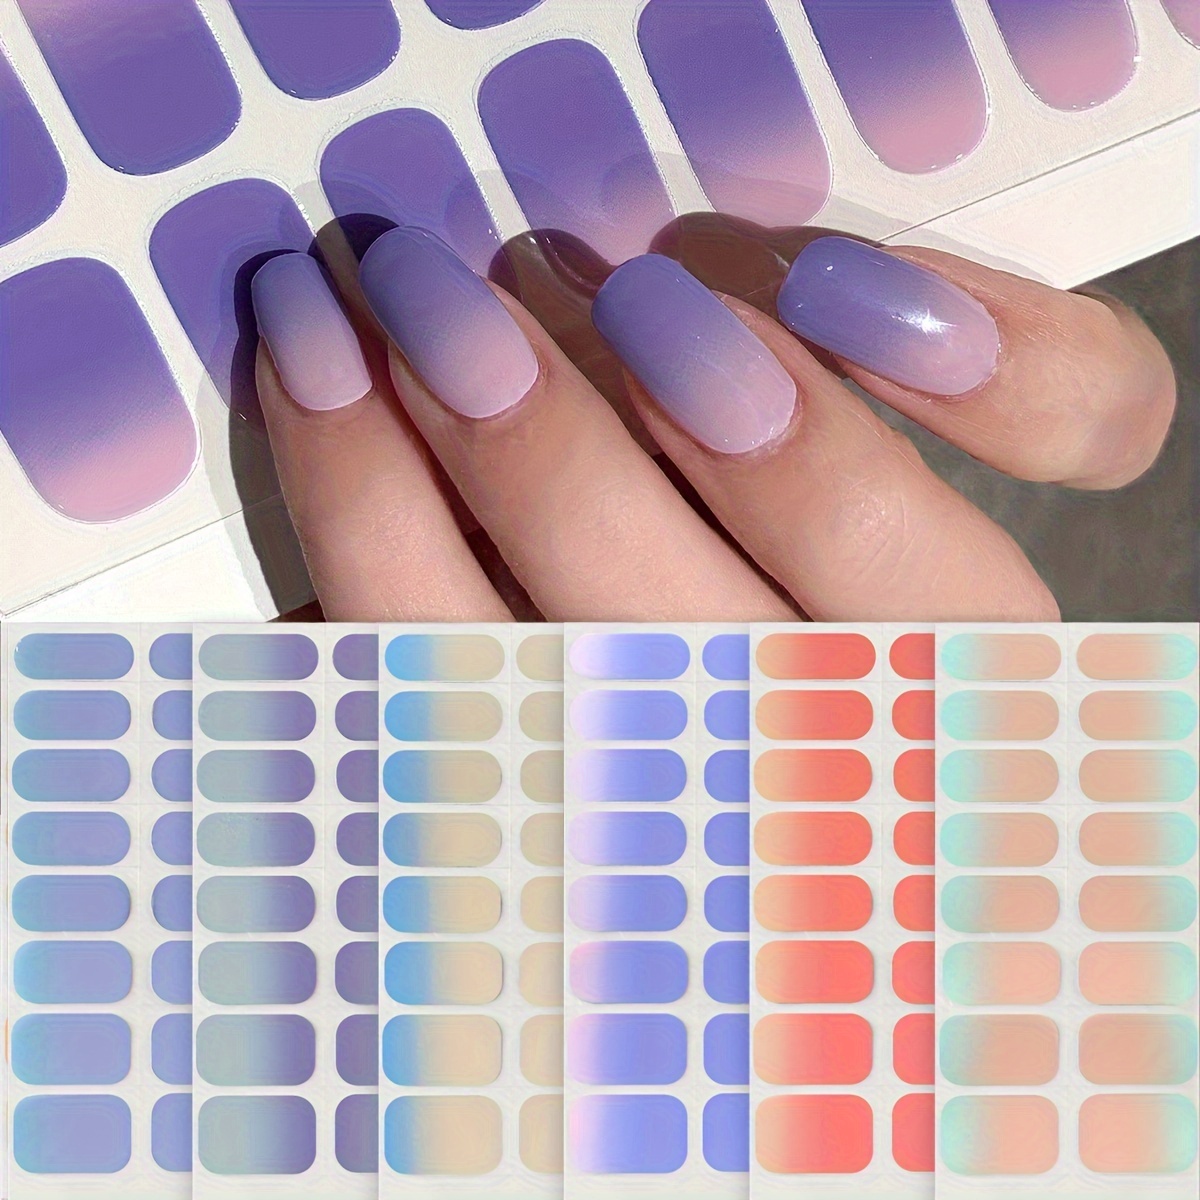 

6-piece Summer Gradient Nail Wraps Set - Shimmer Finish, Self-adhesive Resin Stickers With 3 Emery Boards Included, No Scent, Perfect For Diy Manicure